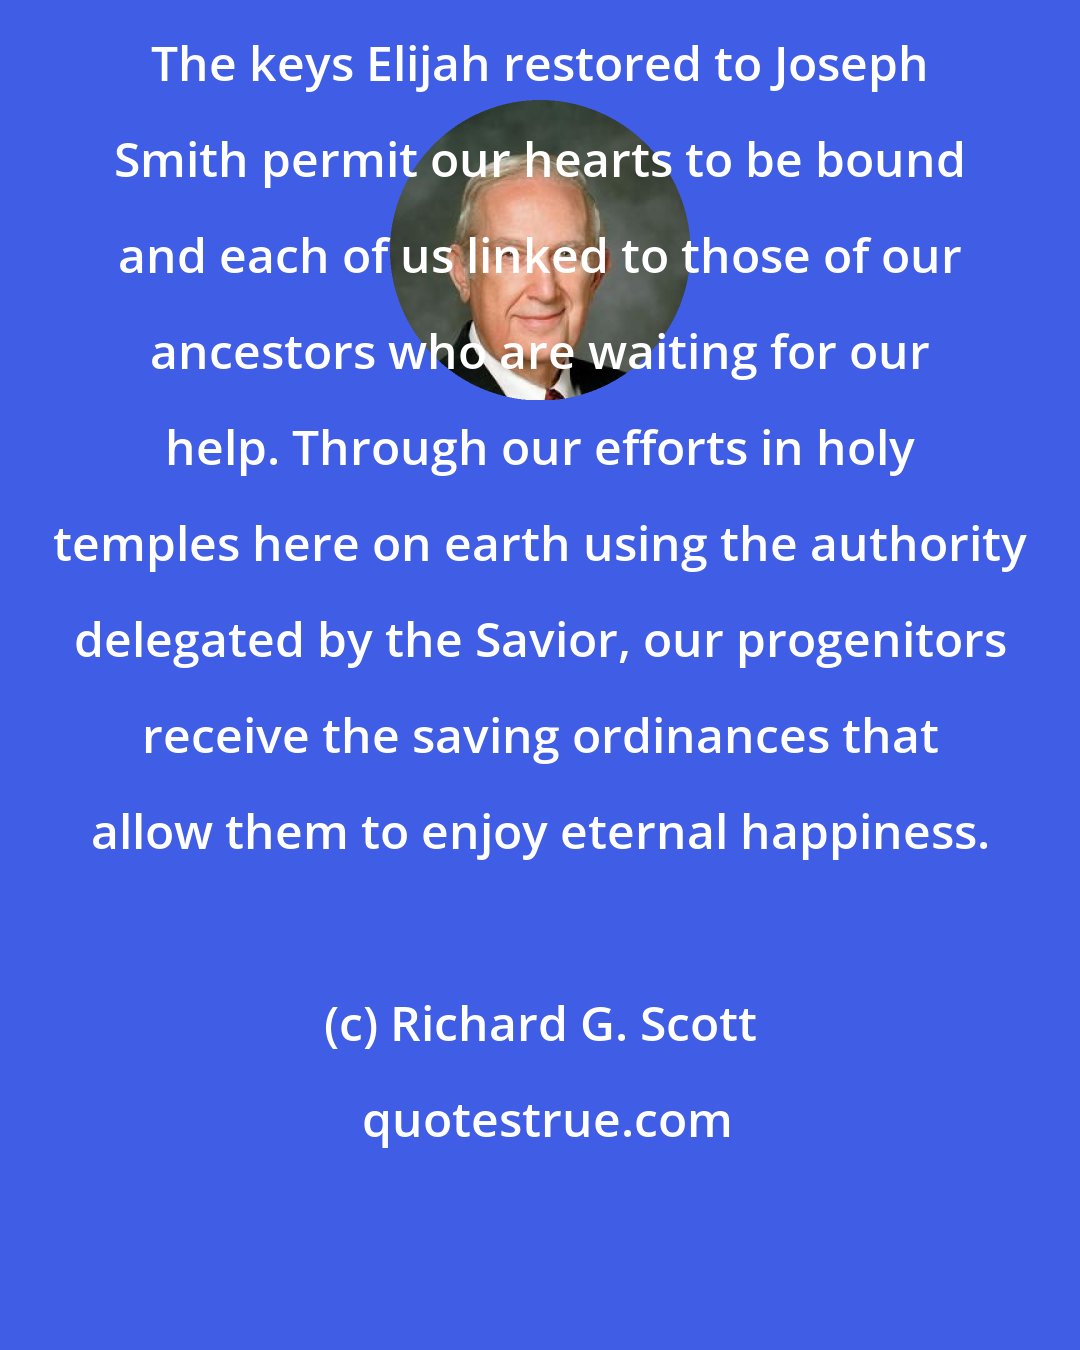 Richard G. Scott: The keys Elijah restored to Joseph Smith permit our hearts to be bound and each of us linked to those of our ancestors who are waiting for our help. Through our efforts in holy temples here on earth using the authority delegated by the Savior, our progenitors receive the saving ordinances that allow them to enjoy eternal happiness.